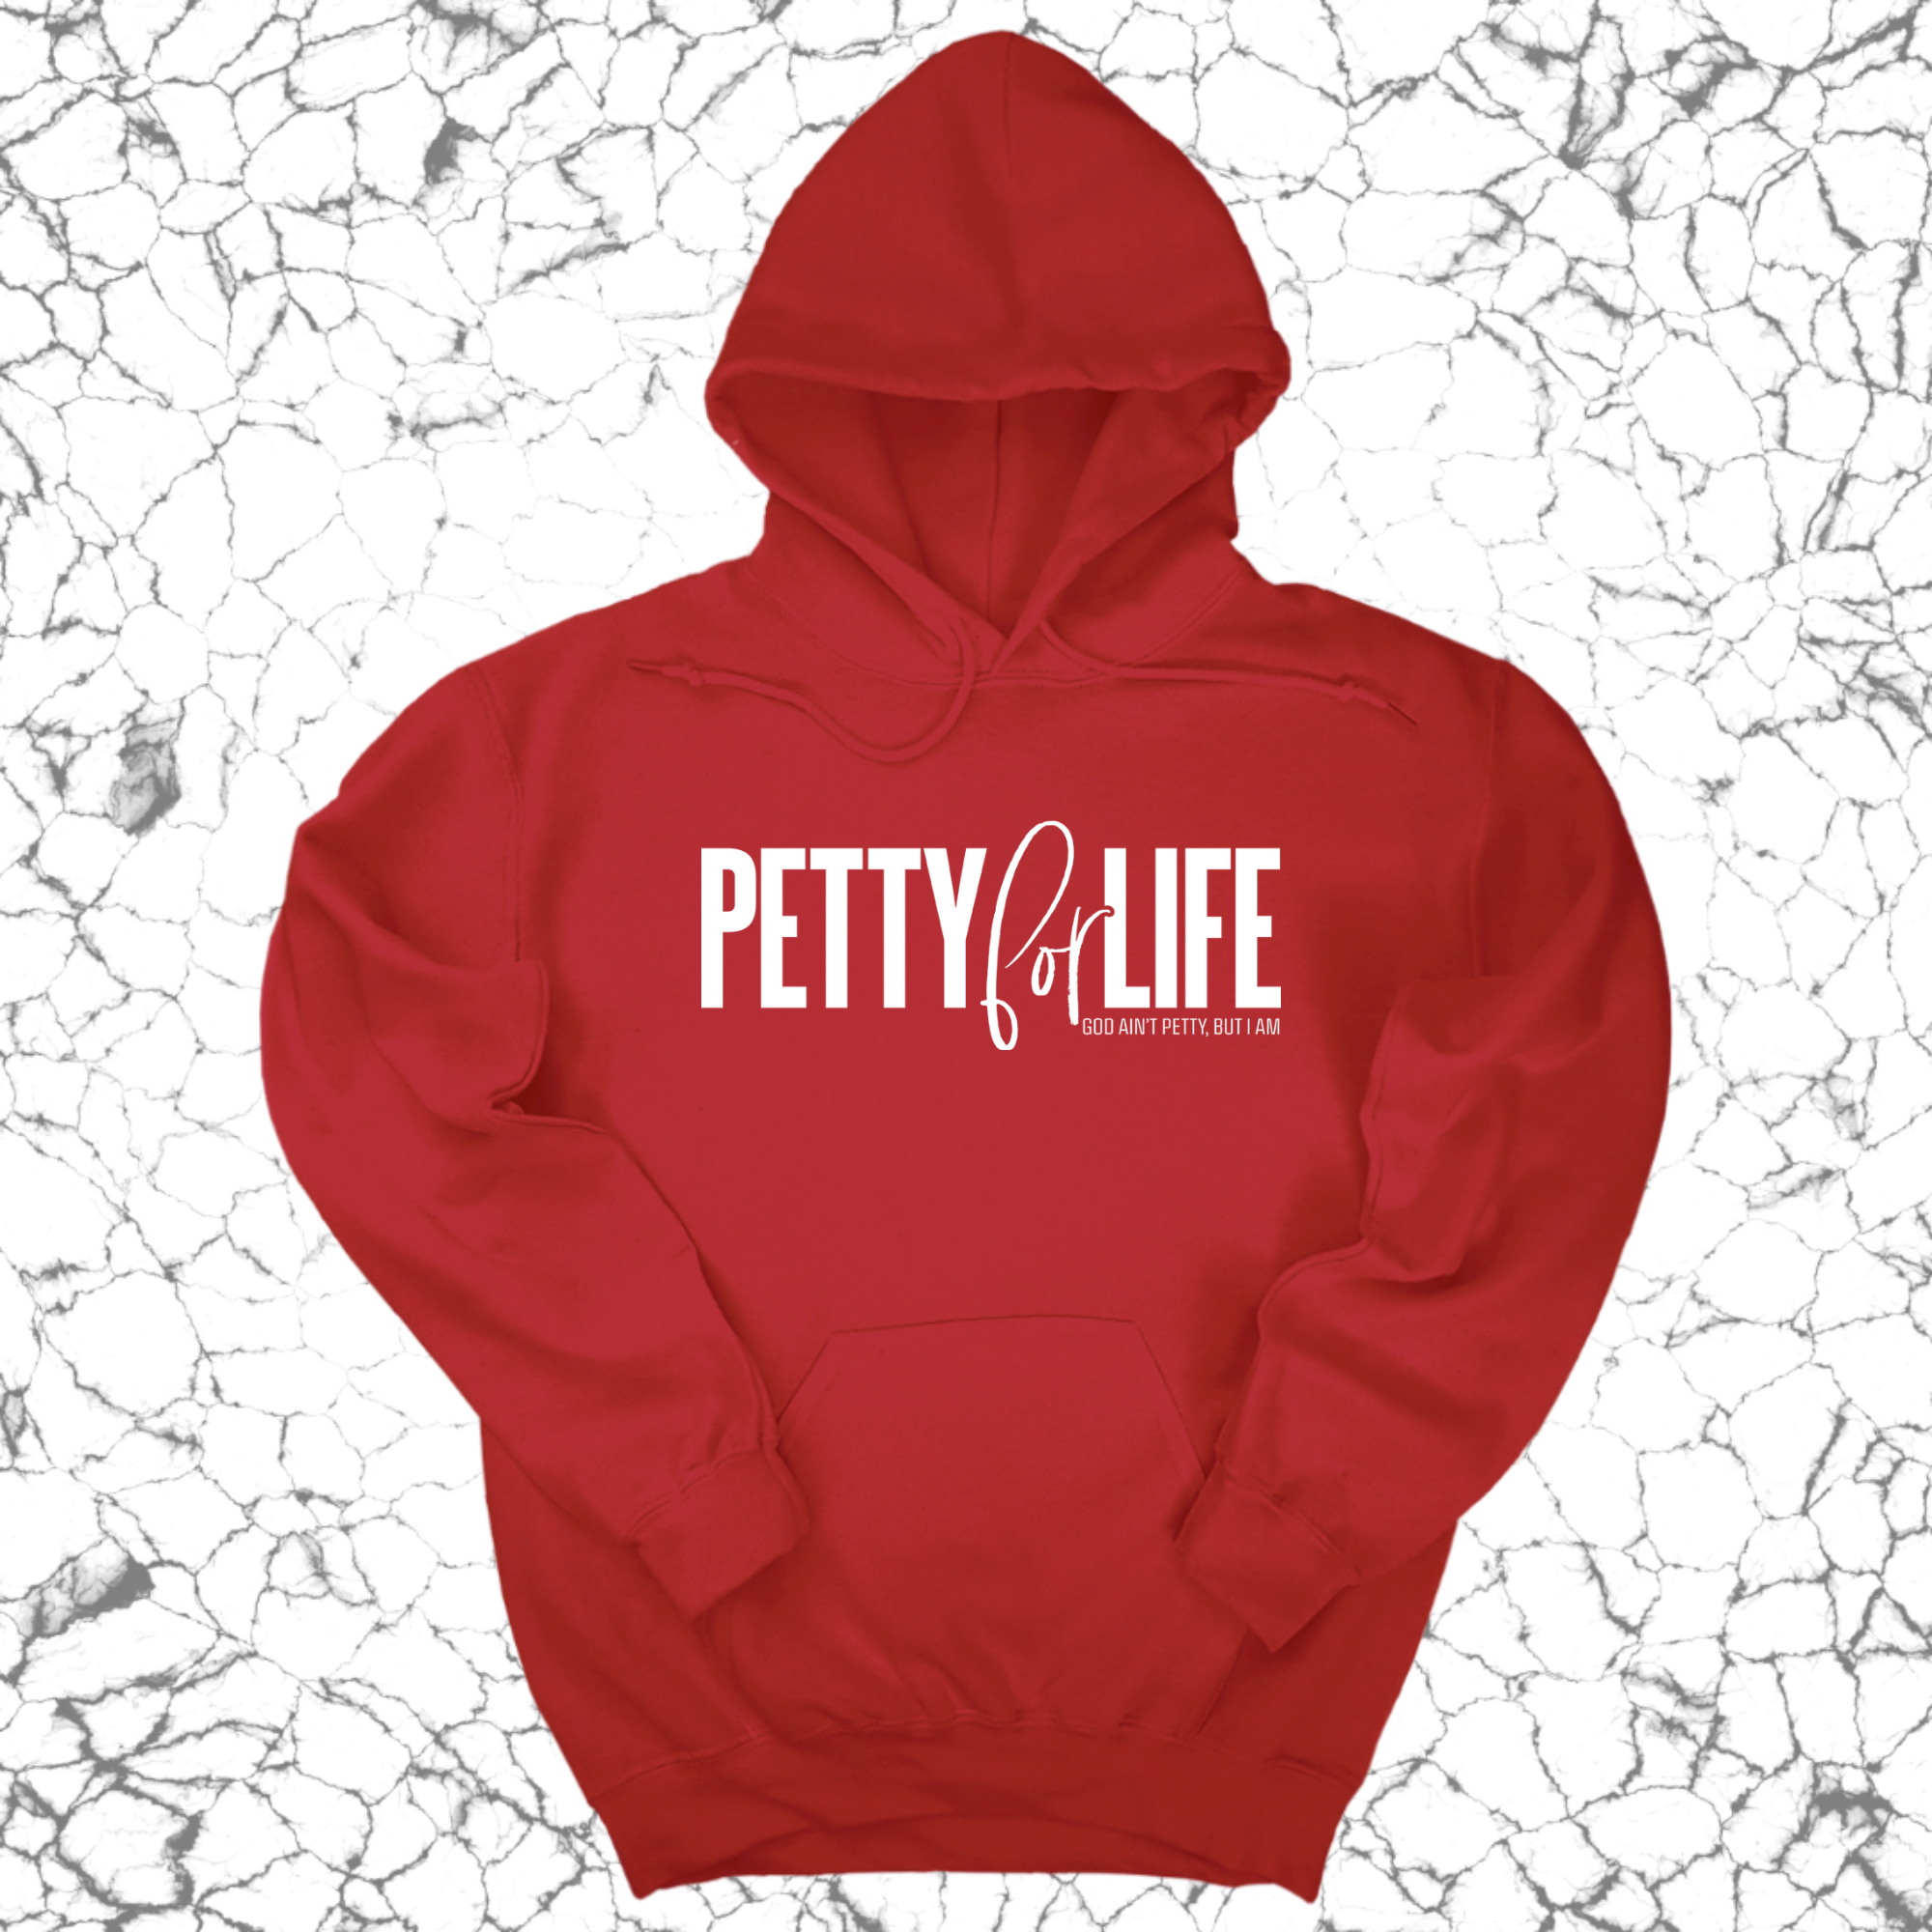 Petty for Life Unisex Hoodie-Hoodie-The Original God Ain't Petty But I Am